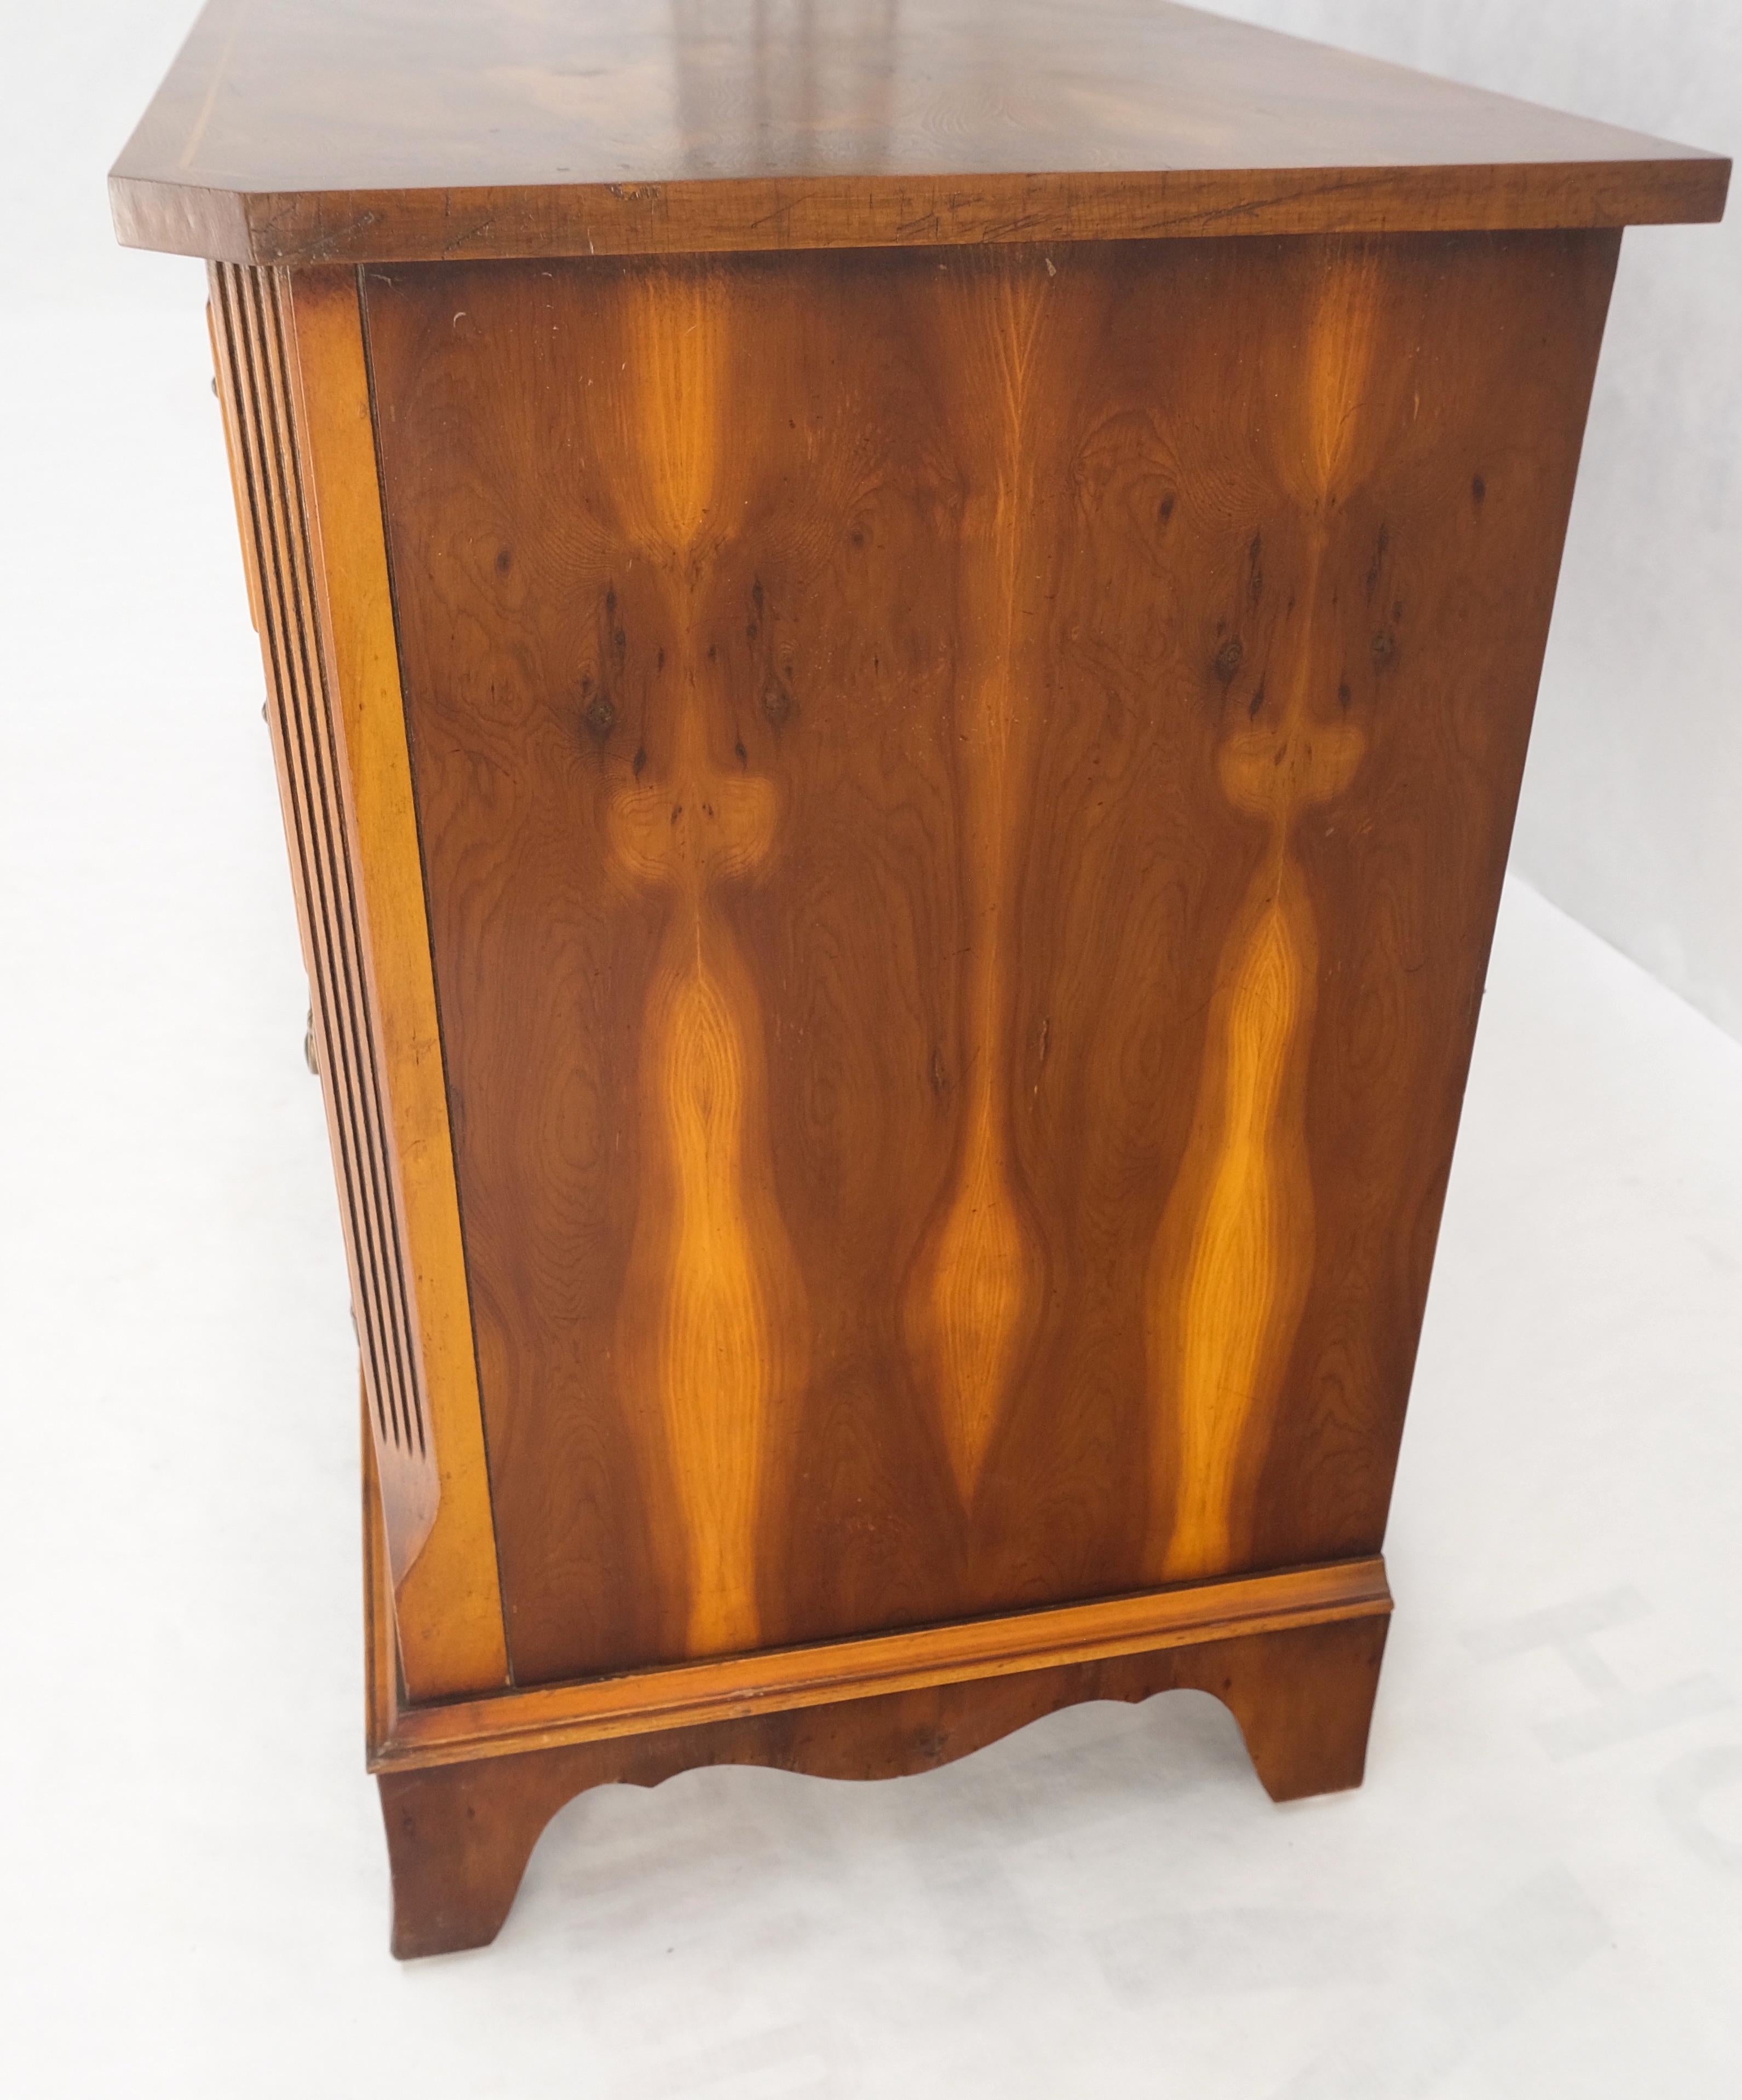 Yew Wood Long 9 Drawers Long Pencil Inlaid Dresser Credenza Brass Drops MINT! For Sale 8